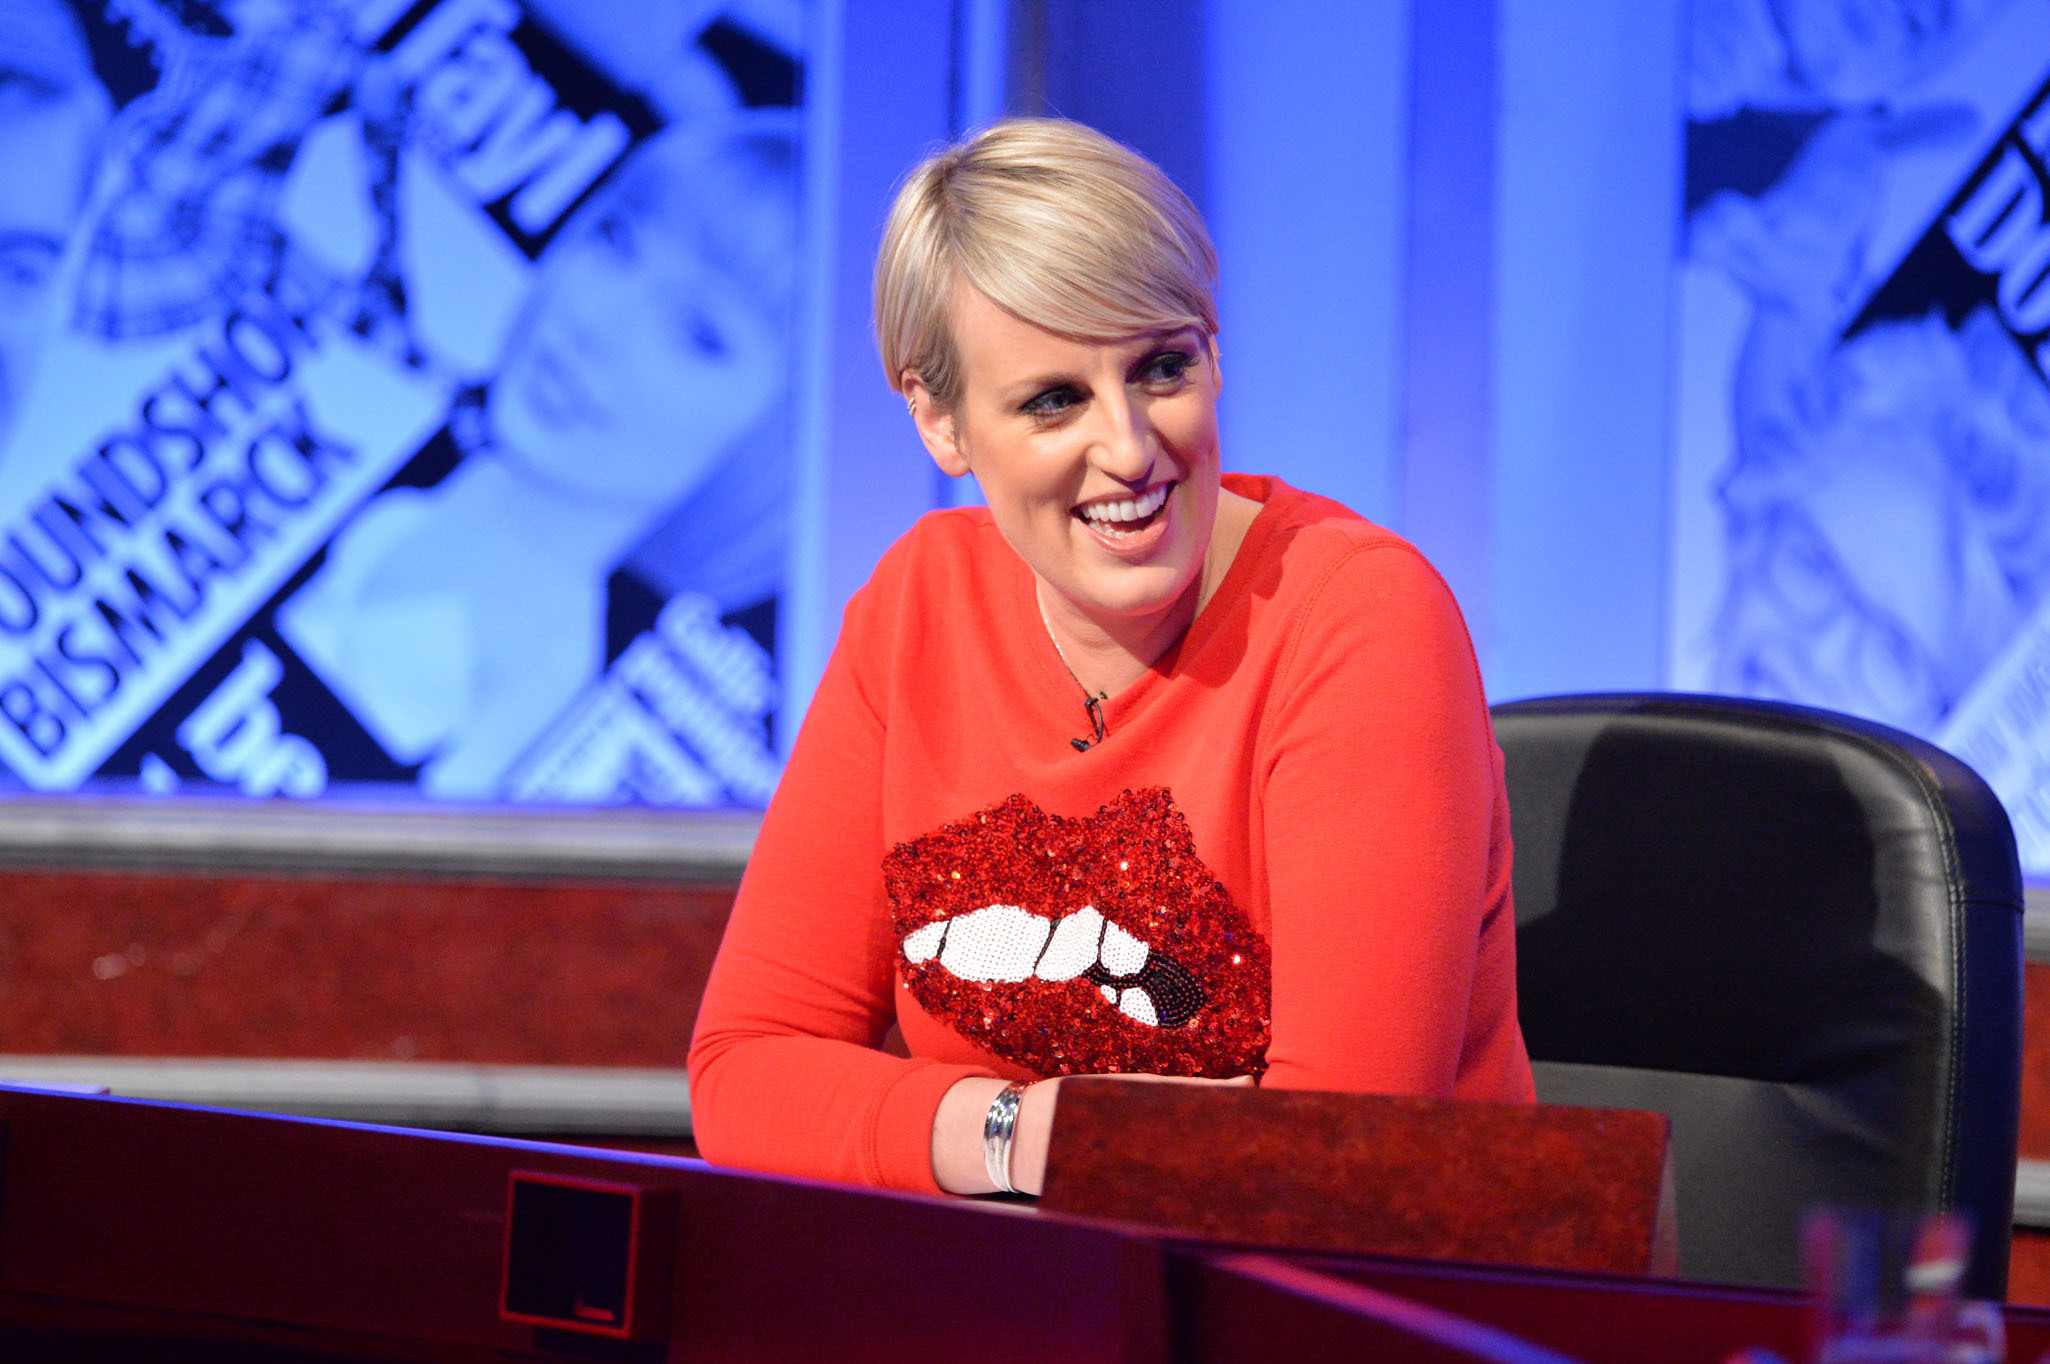 Have I Got News with Steph McGovern